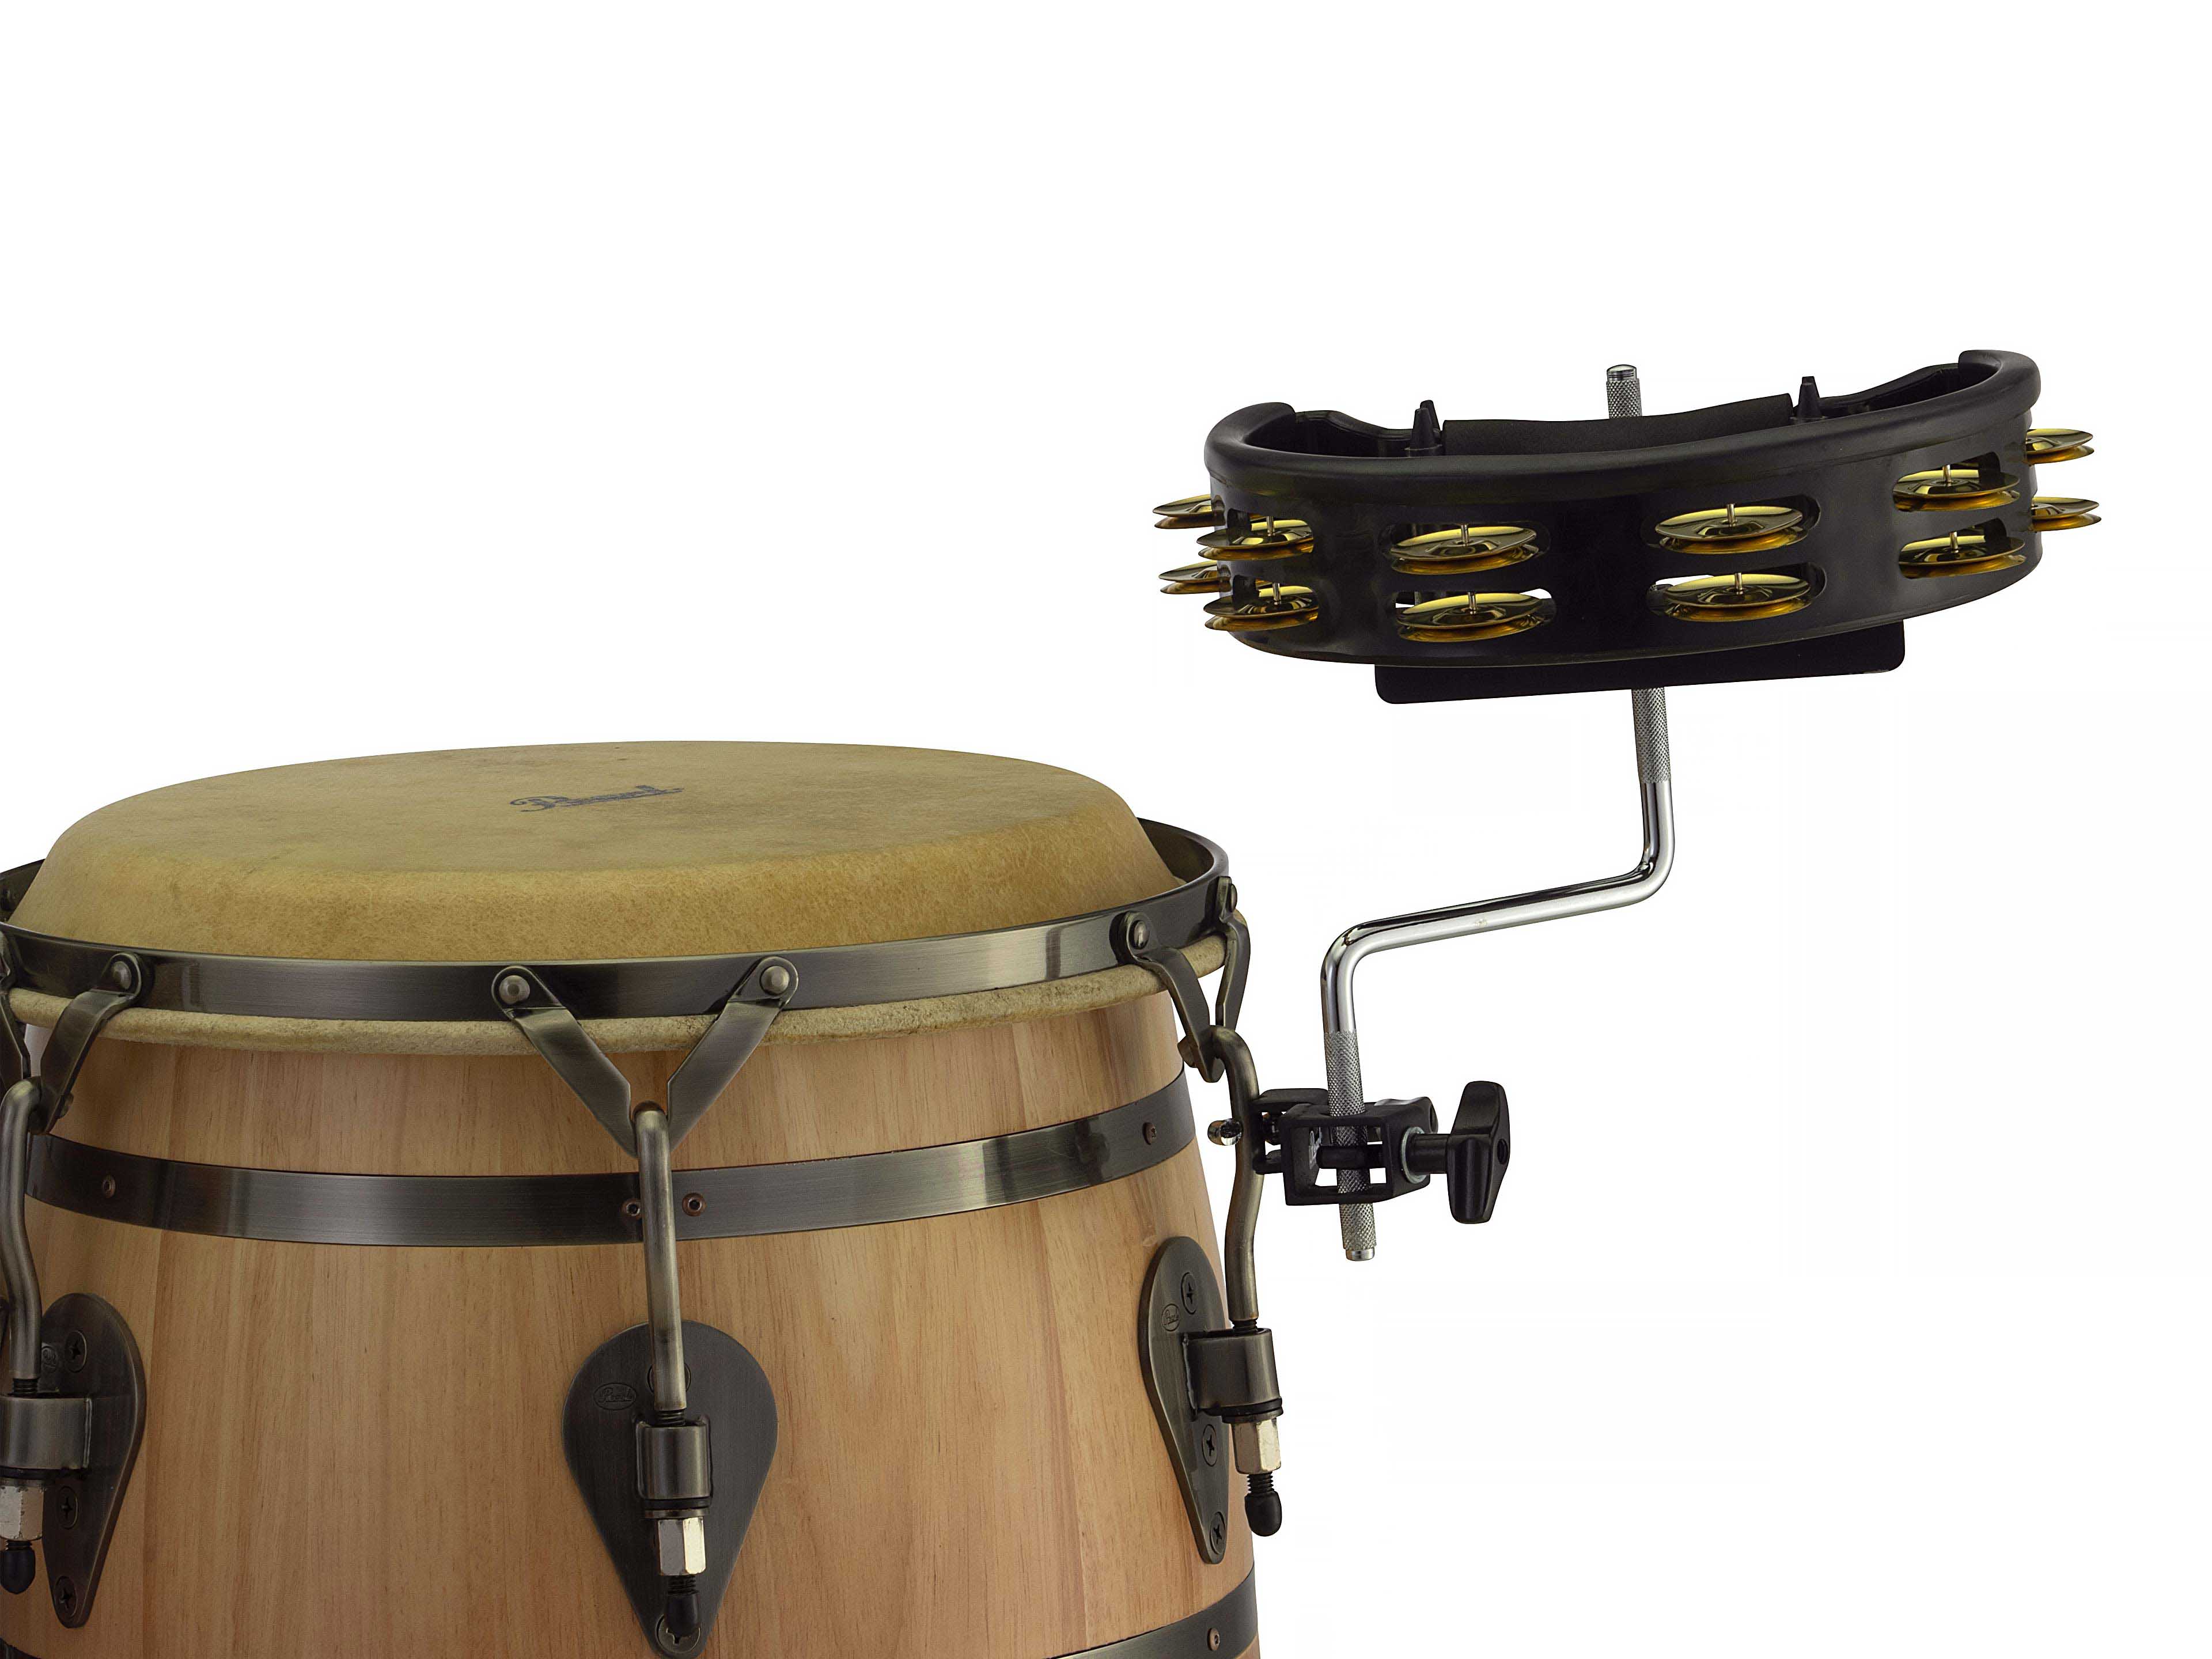 Clamps & Accessories | パール楽器【公式サイト】Pearl Drums